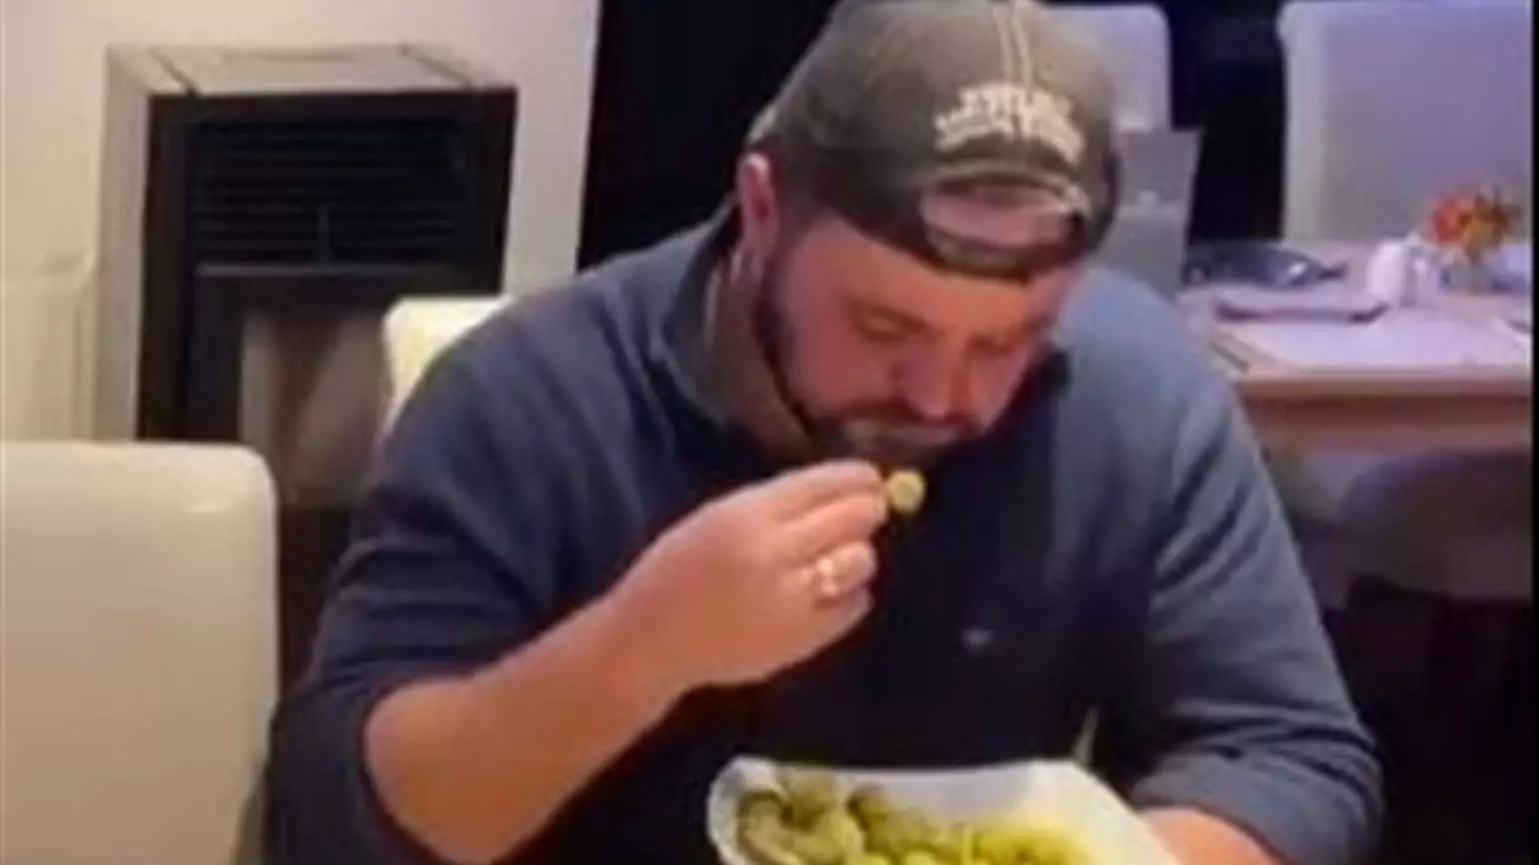 Truck Driver Breaks World Record For Most Sprouts Eaten In 60 Seconds